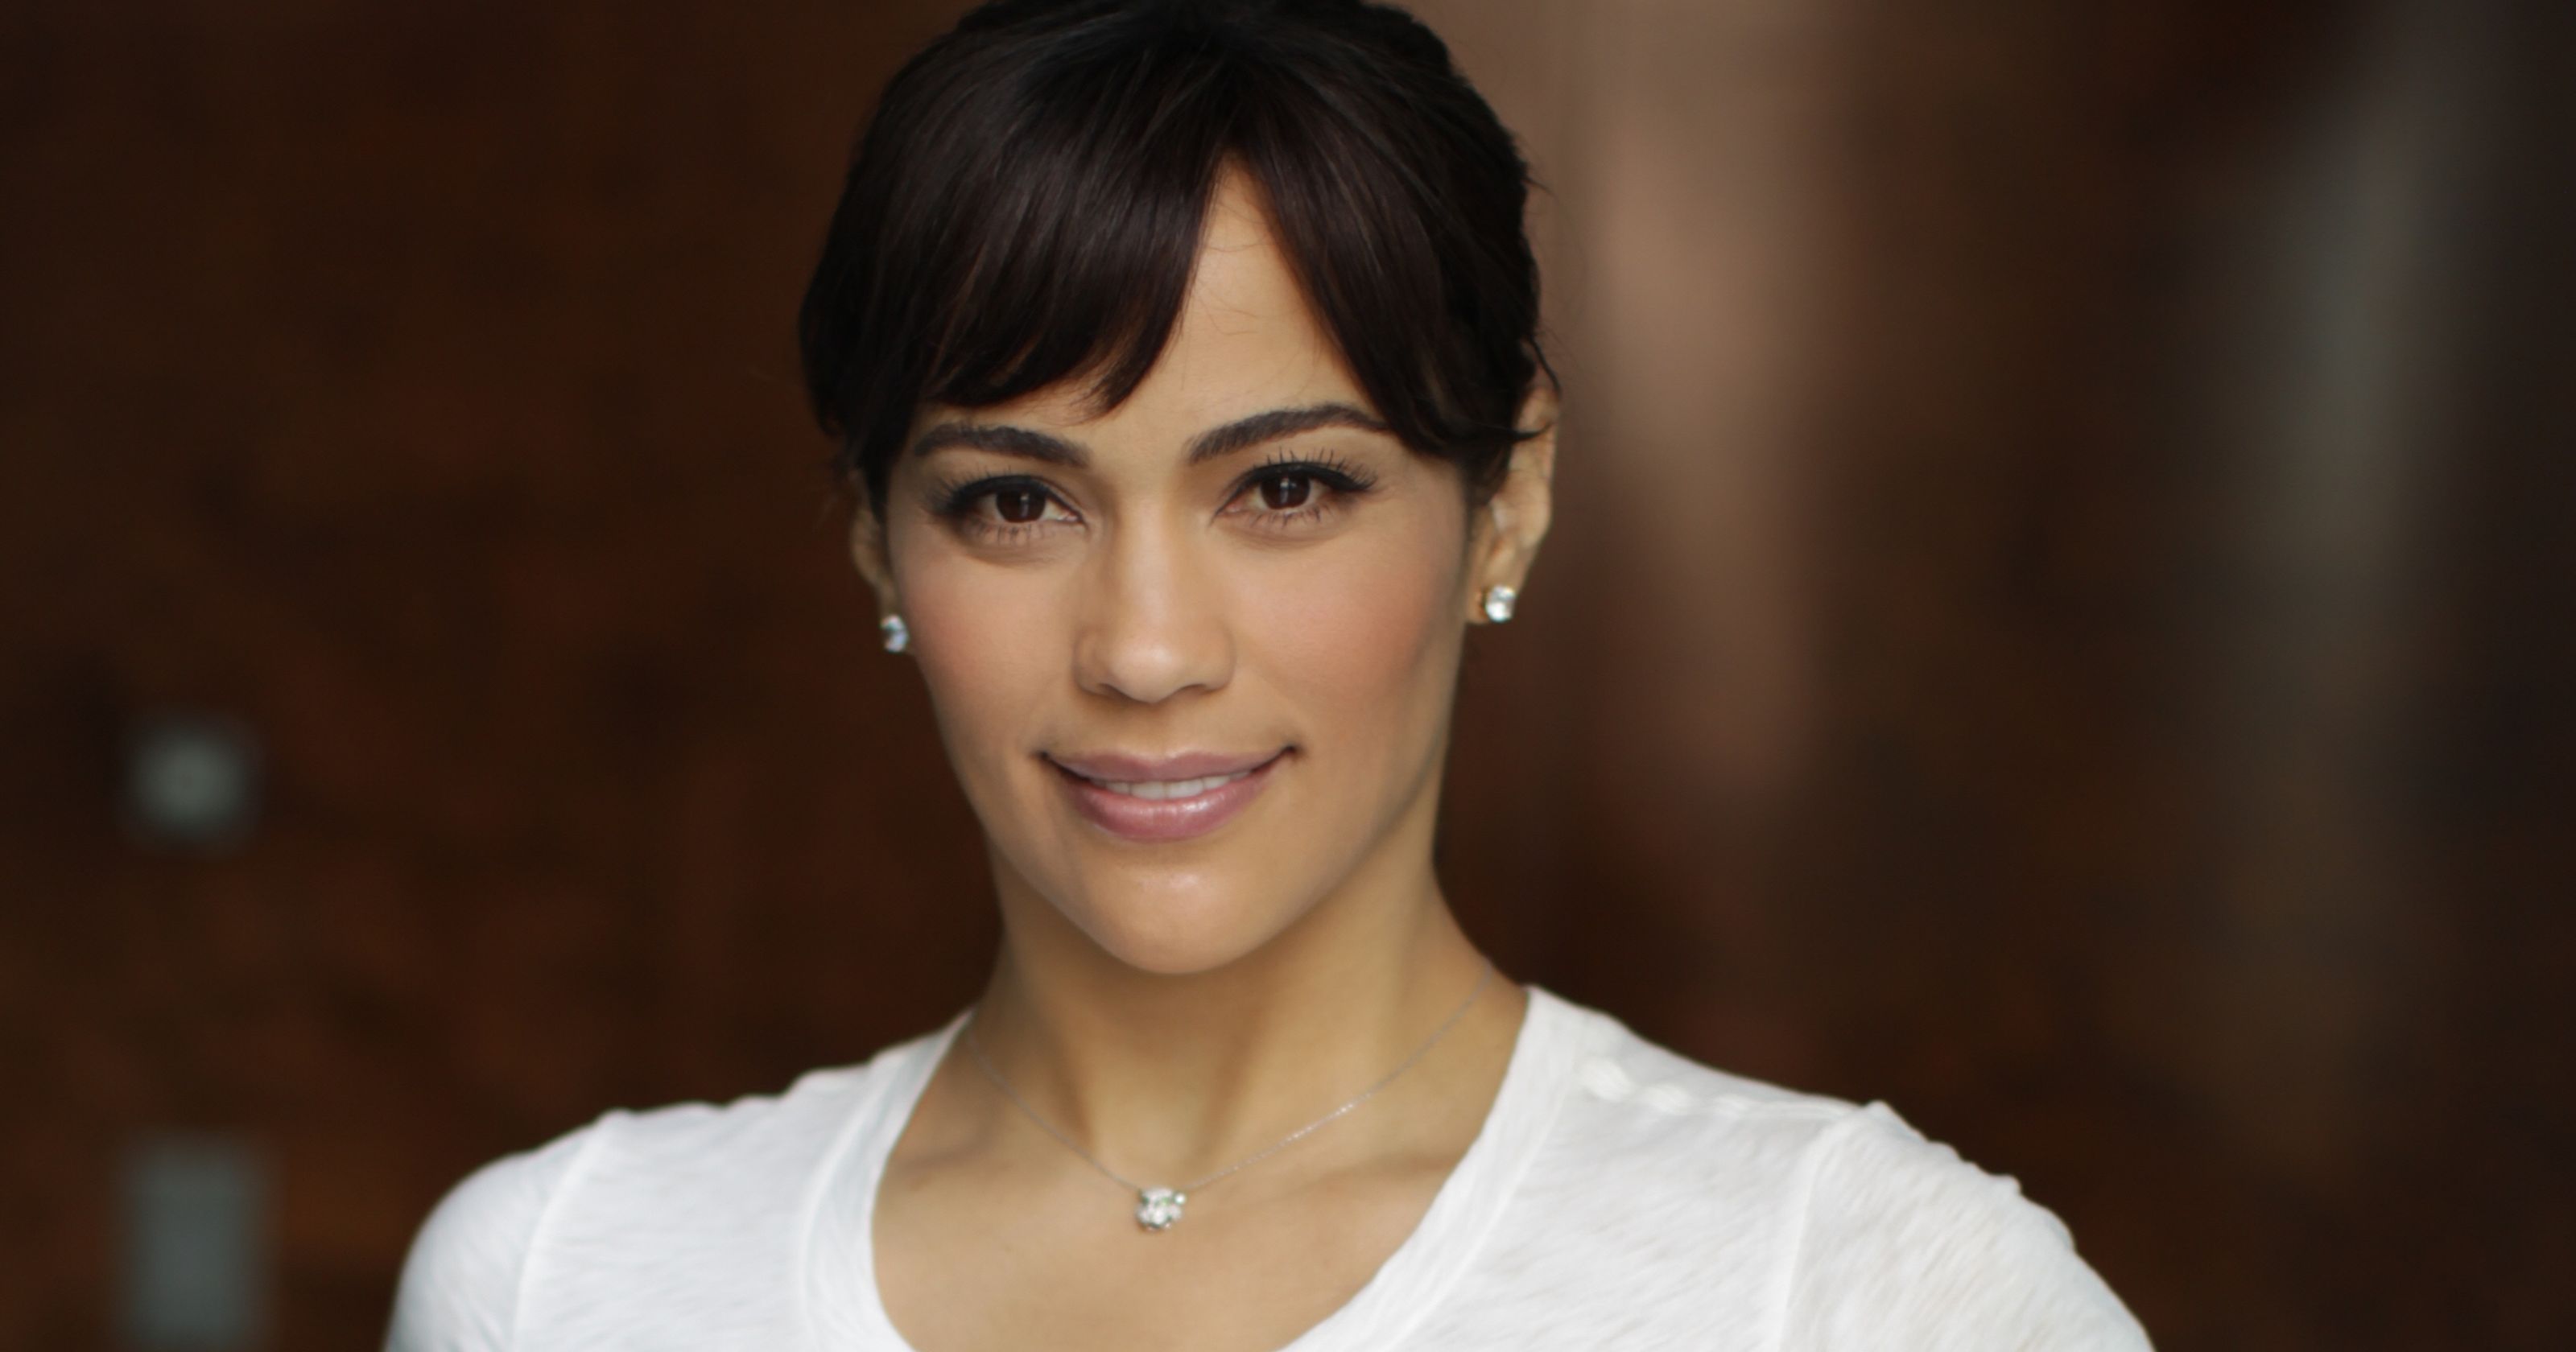 Paula Patton Wallpapers Images Photos Pictures Backgrounds